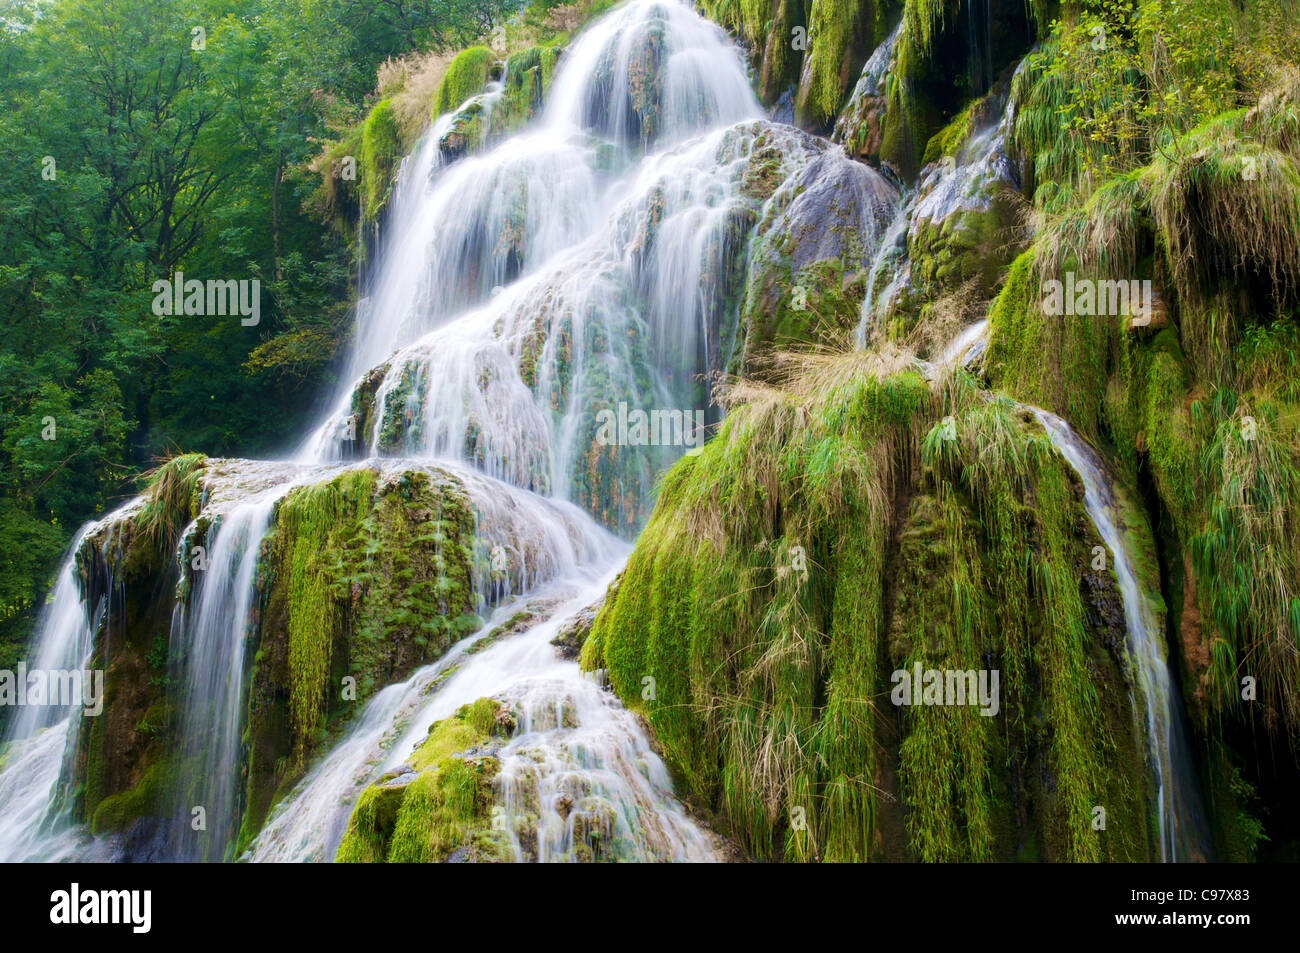 The cascading water falls of Baume-les-Messieurs. Stock Photo